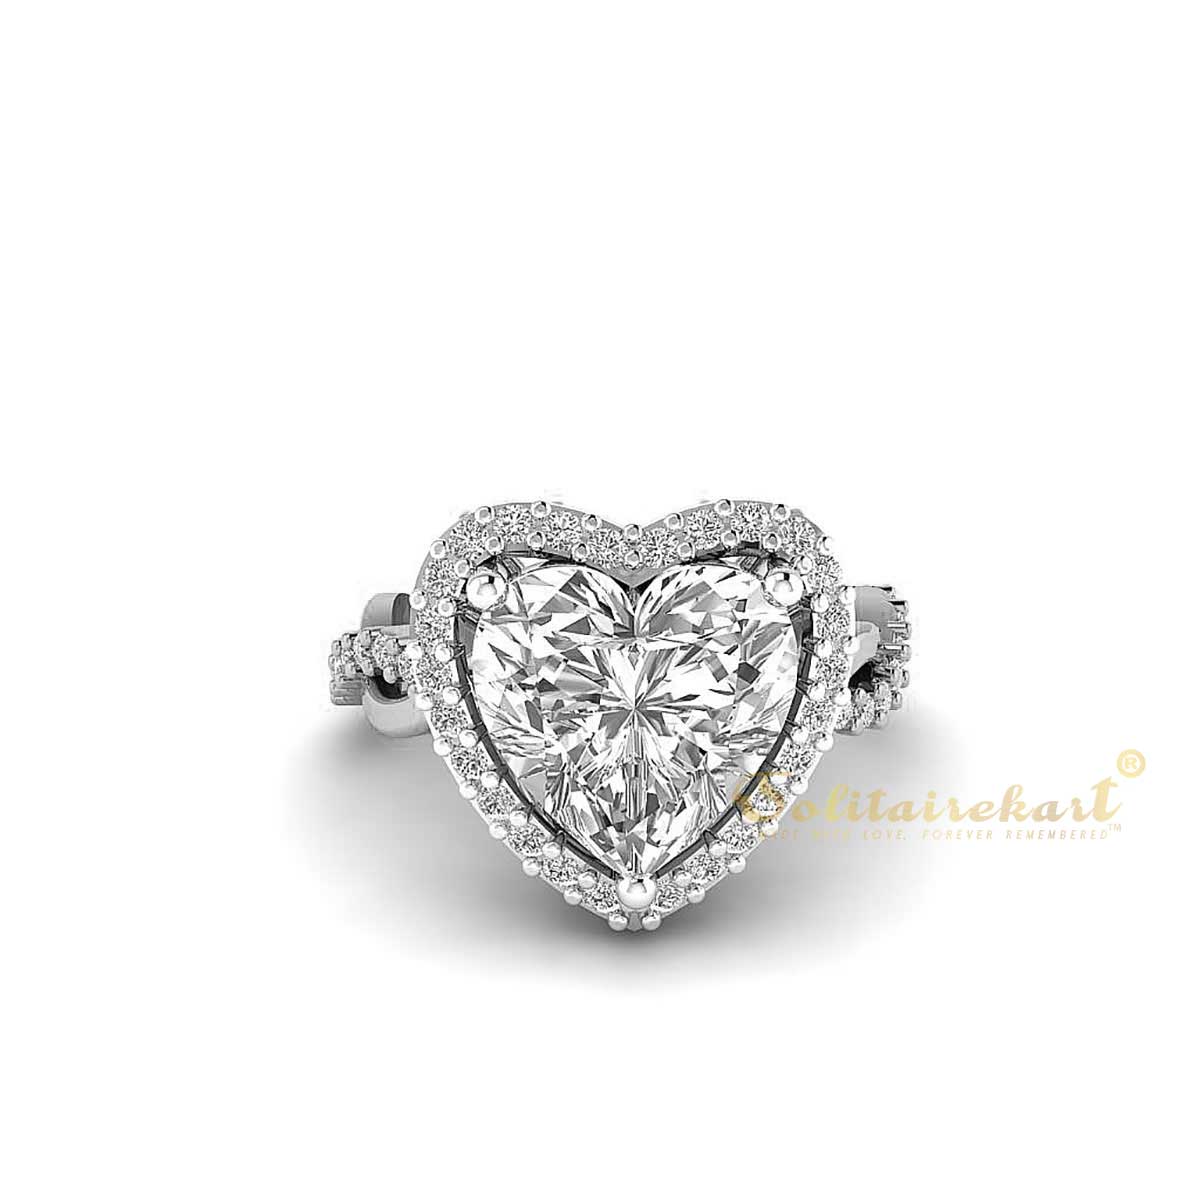 14k white gold 1ct heart-shaped diamond engagement ring with band